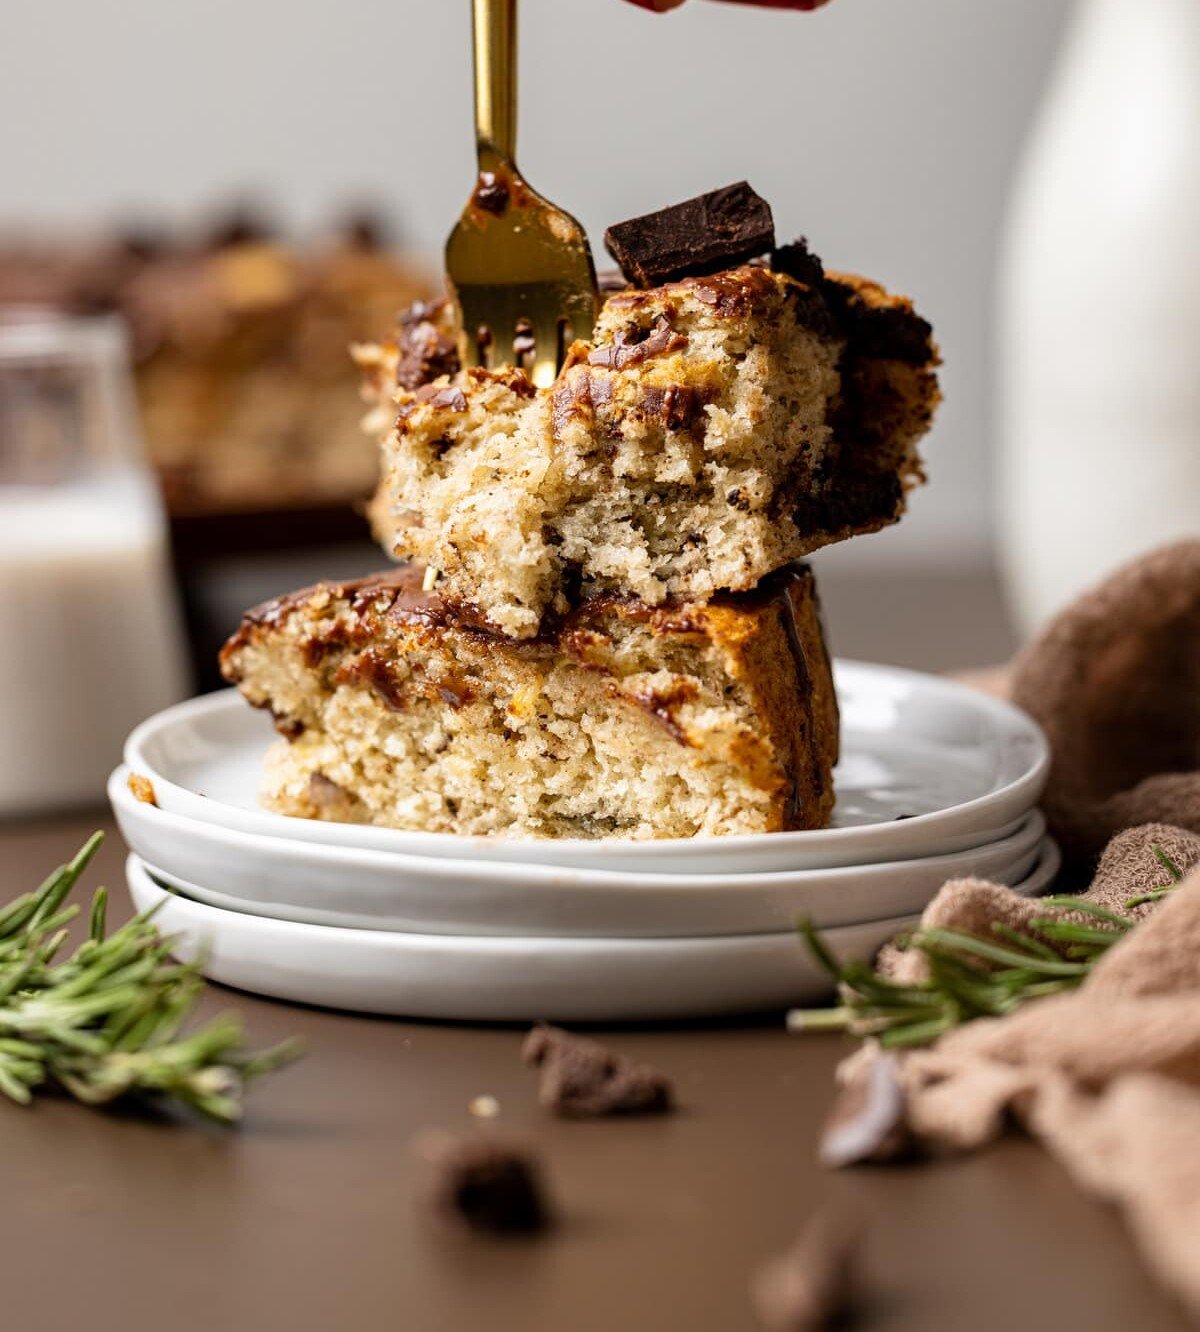 Fork stabbing into two stacked slices of Vegan Chocolate Chip Banana Cake.